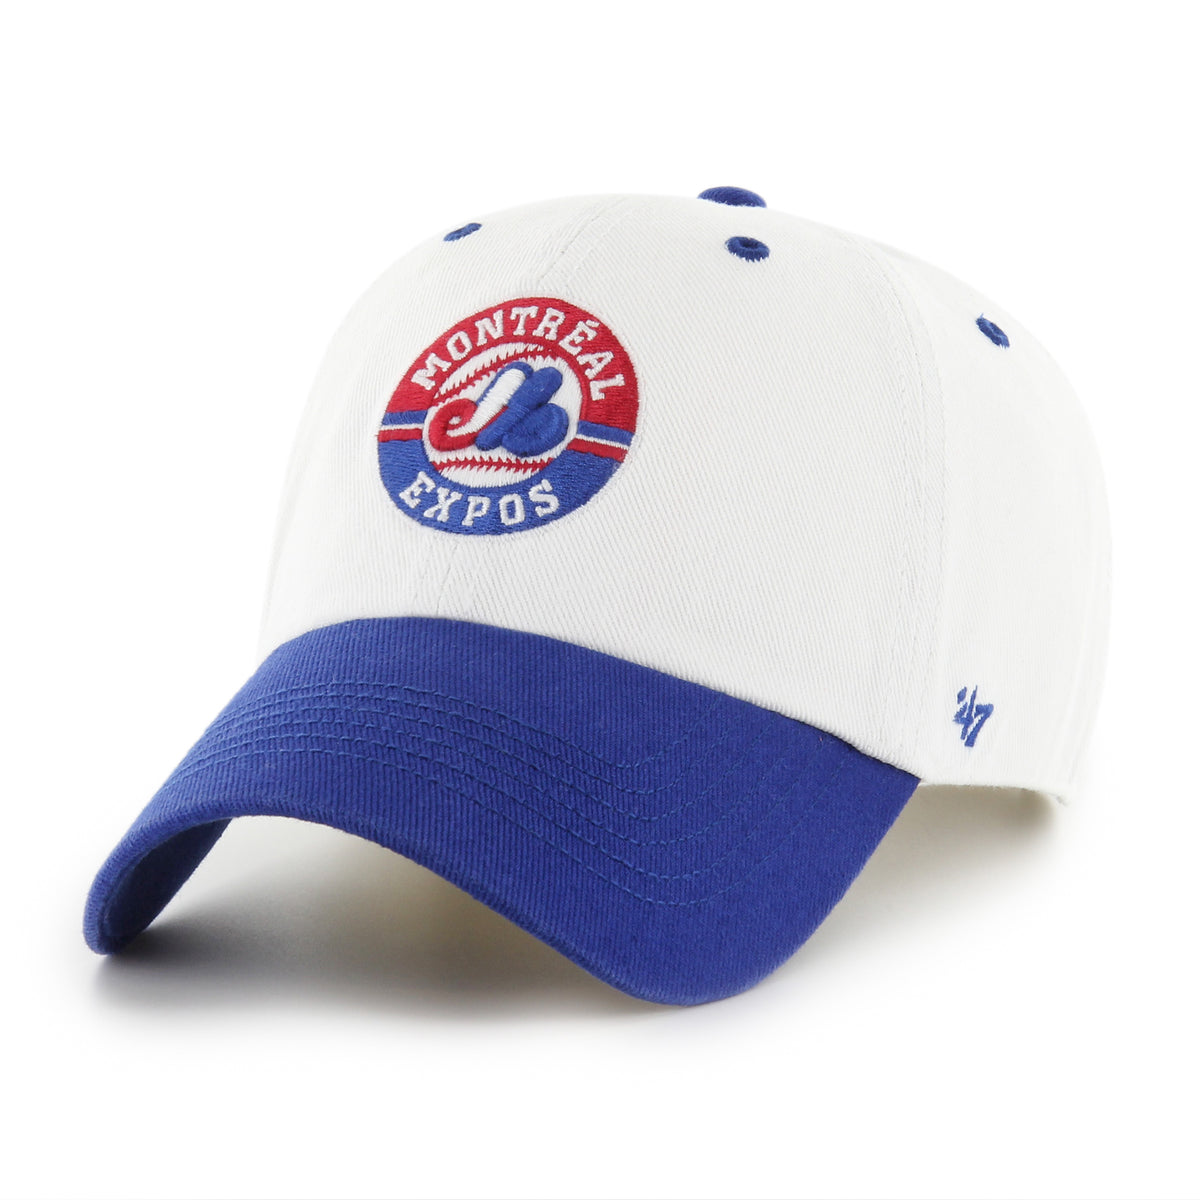 MONTREAL EXPOS COOPERSTOWN DOUBLE HEADER DIAMOND '47 CLEAN UP